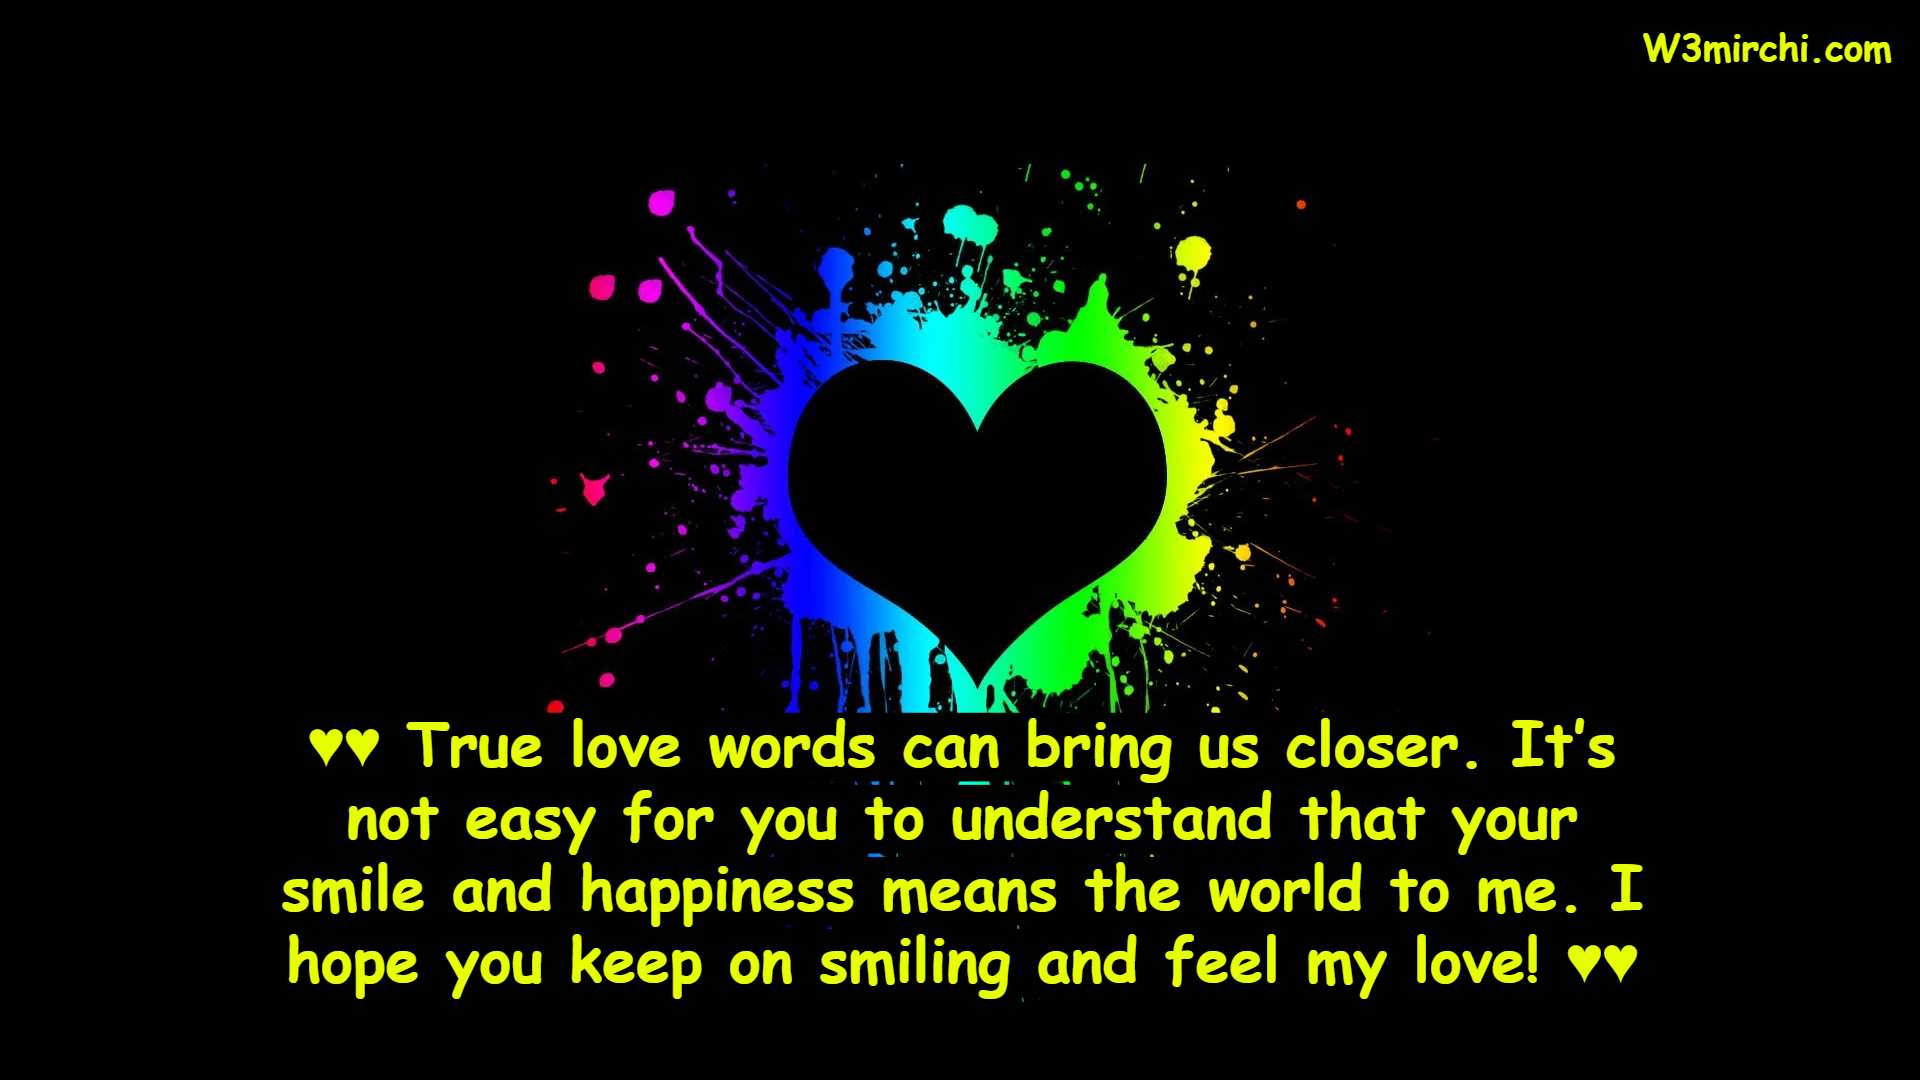 ♥♥ True love words can bring us closer.